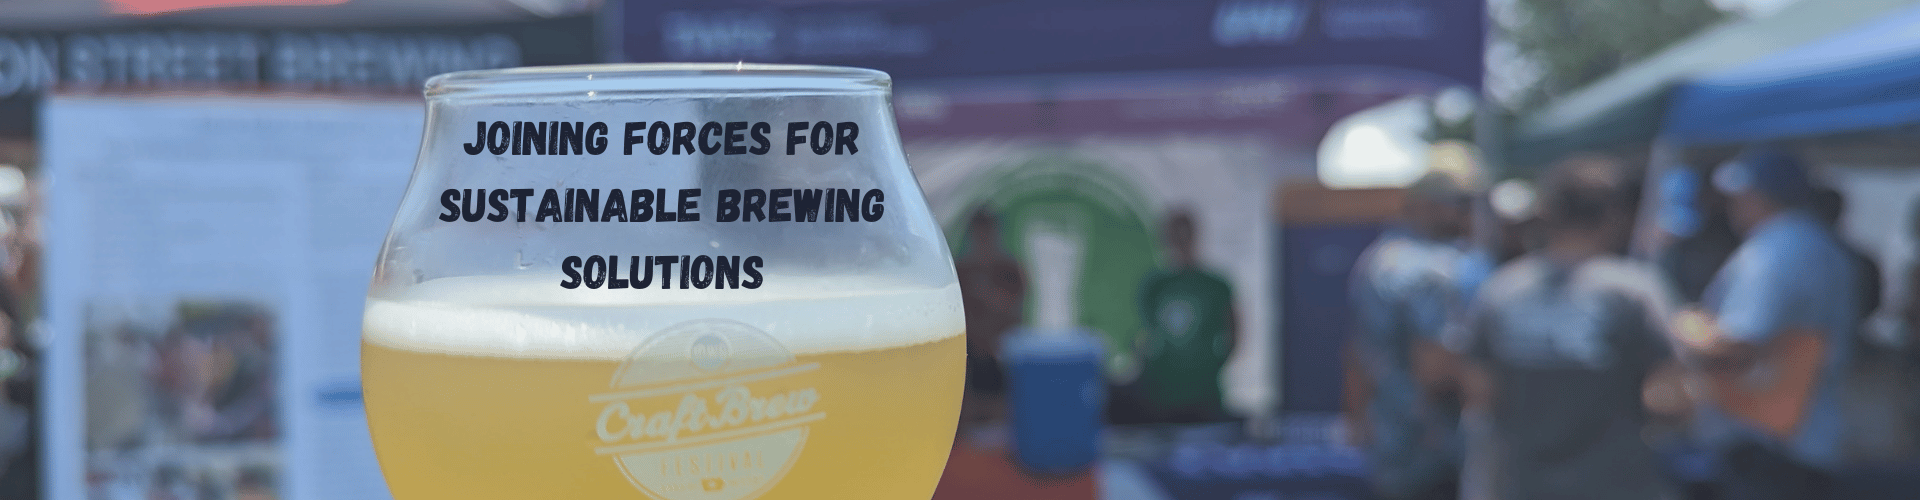 Joining Forces for Sustainable Brewing Solutions